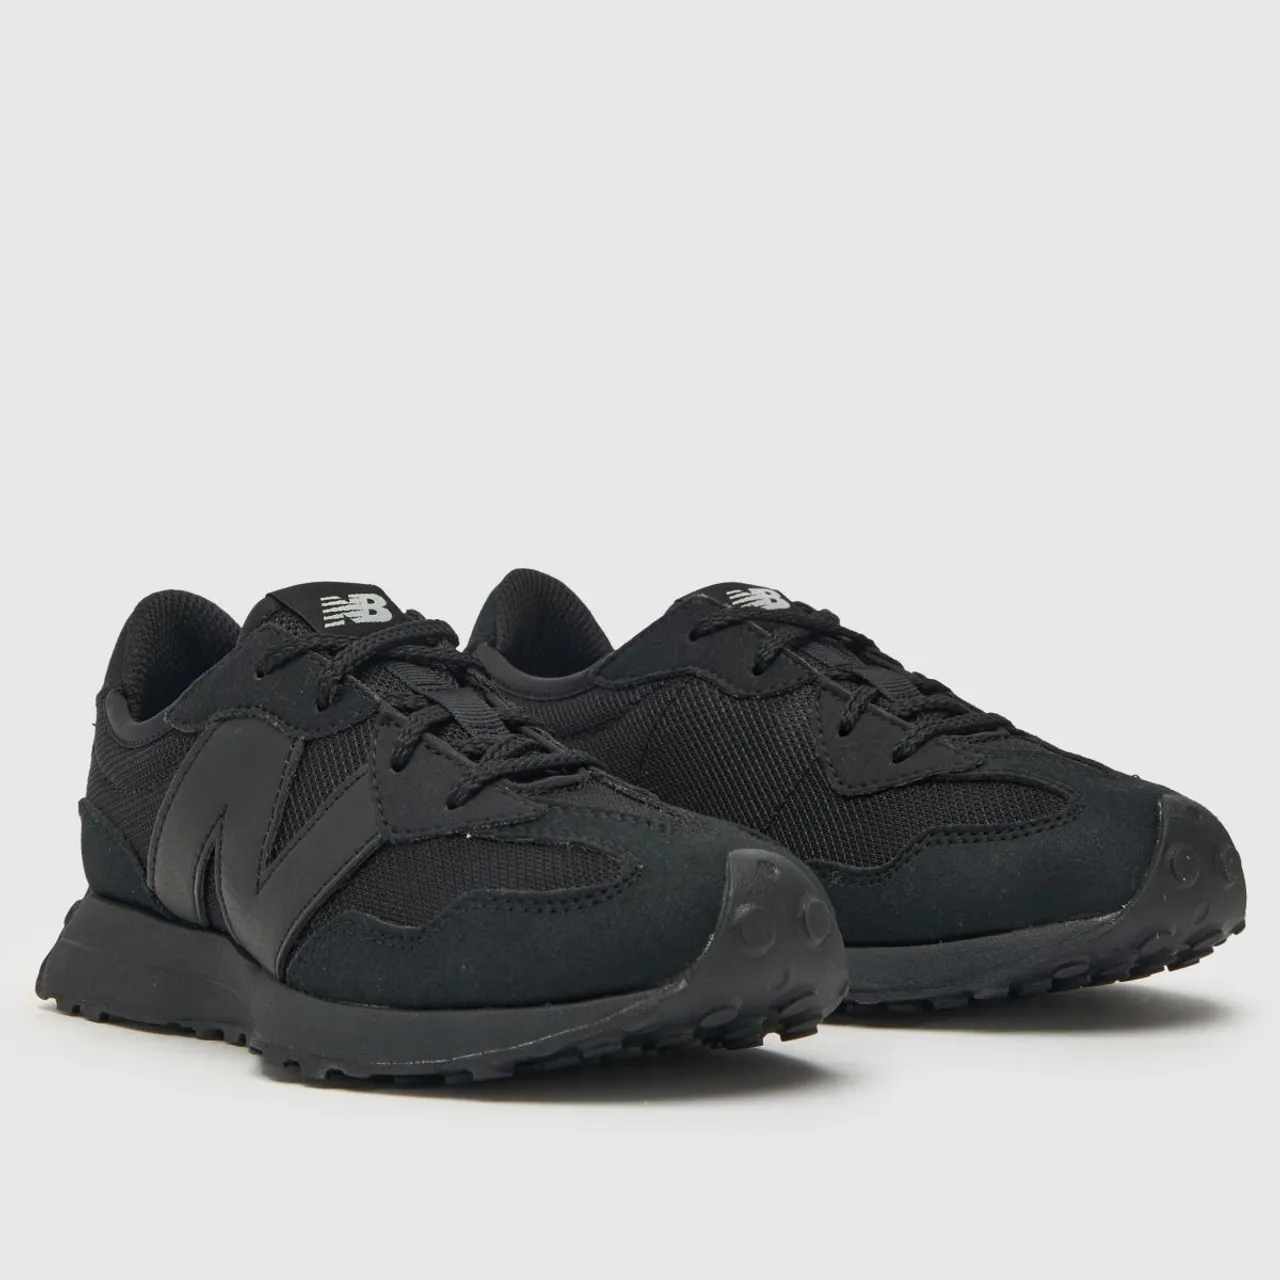 New Balance Black 327 Youth Trainers